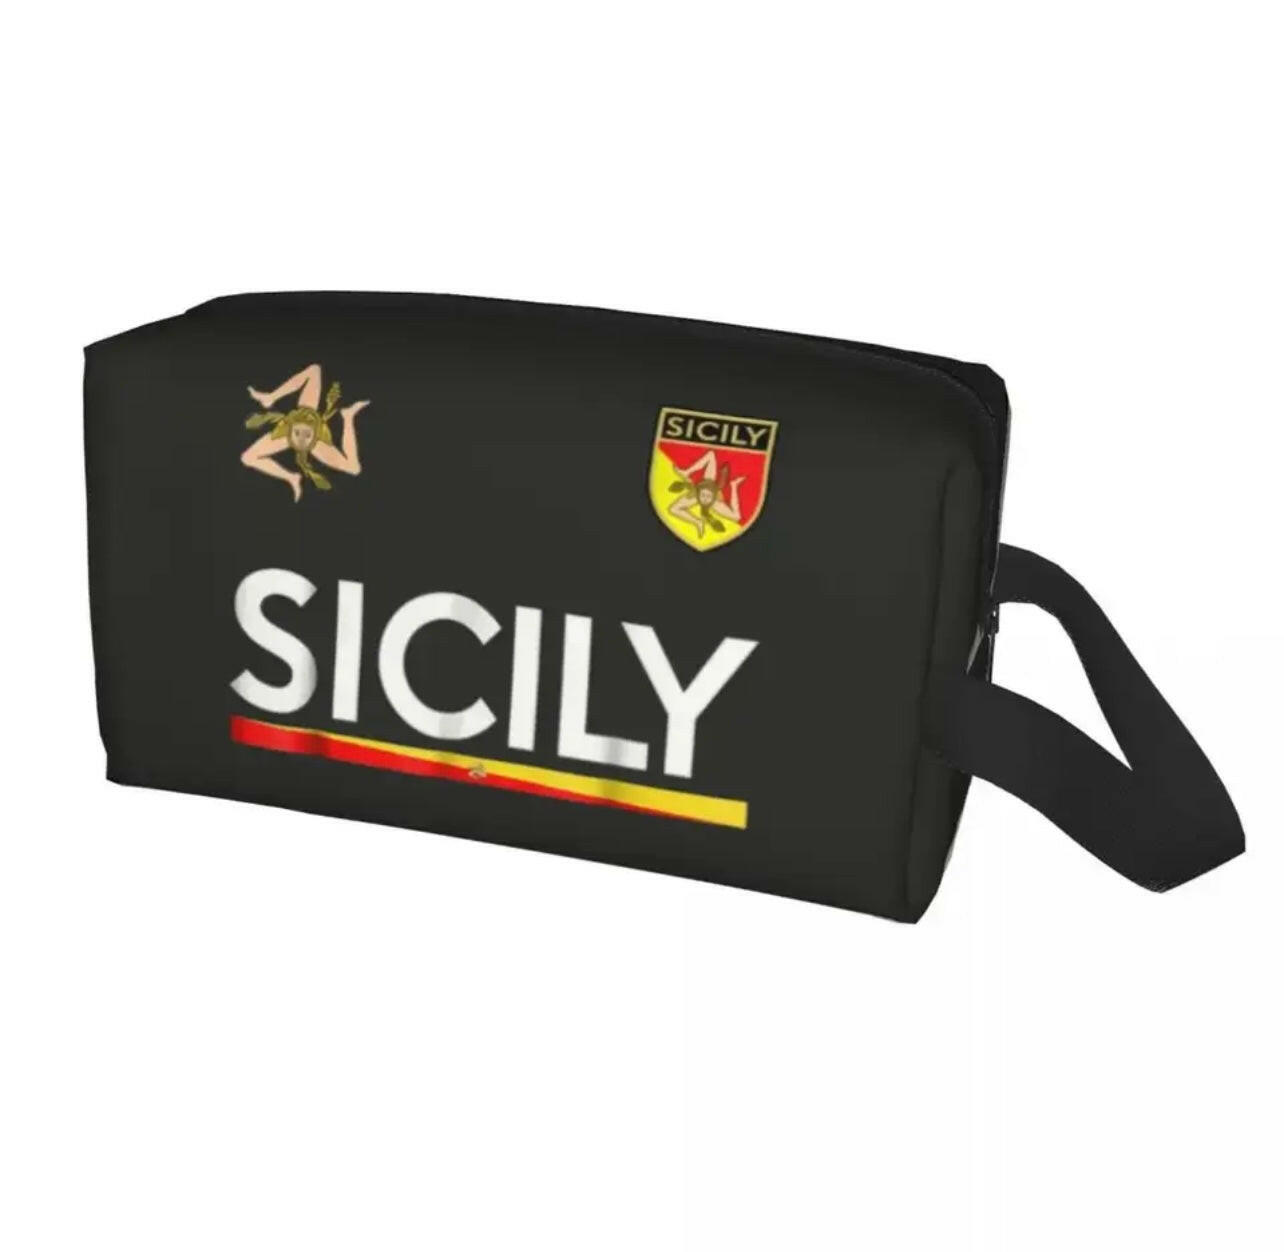 Sicily Large Cosmetic/Accessories Travel Bag.